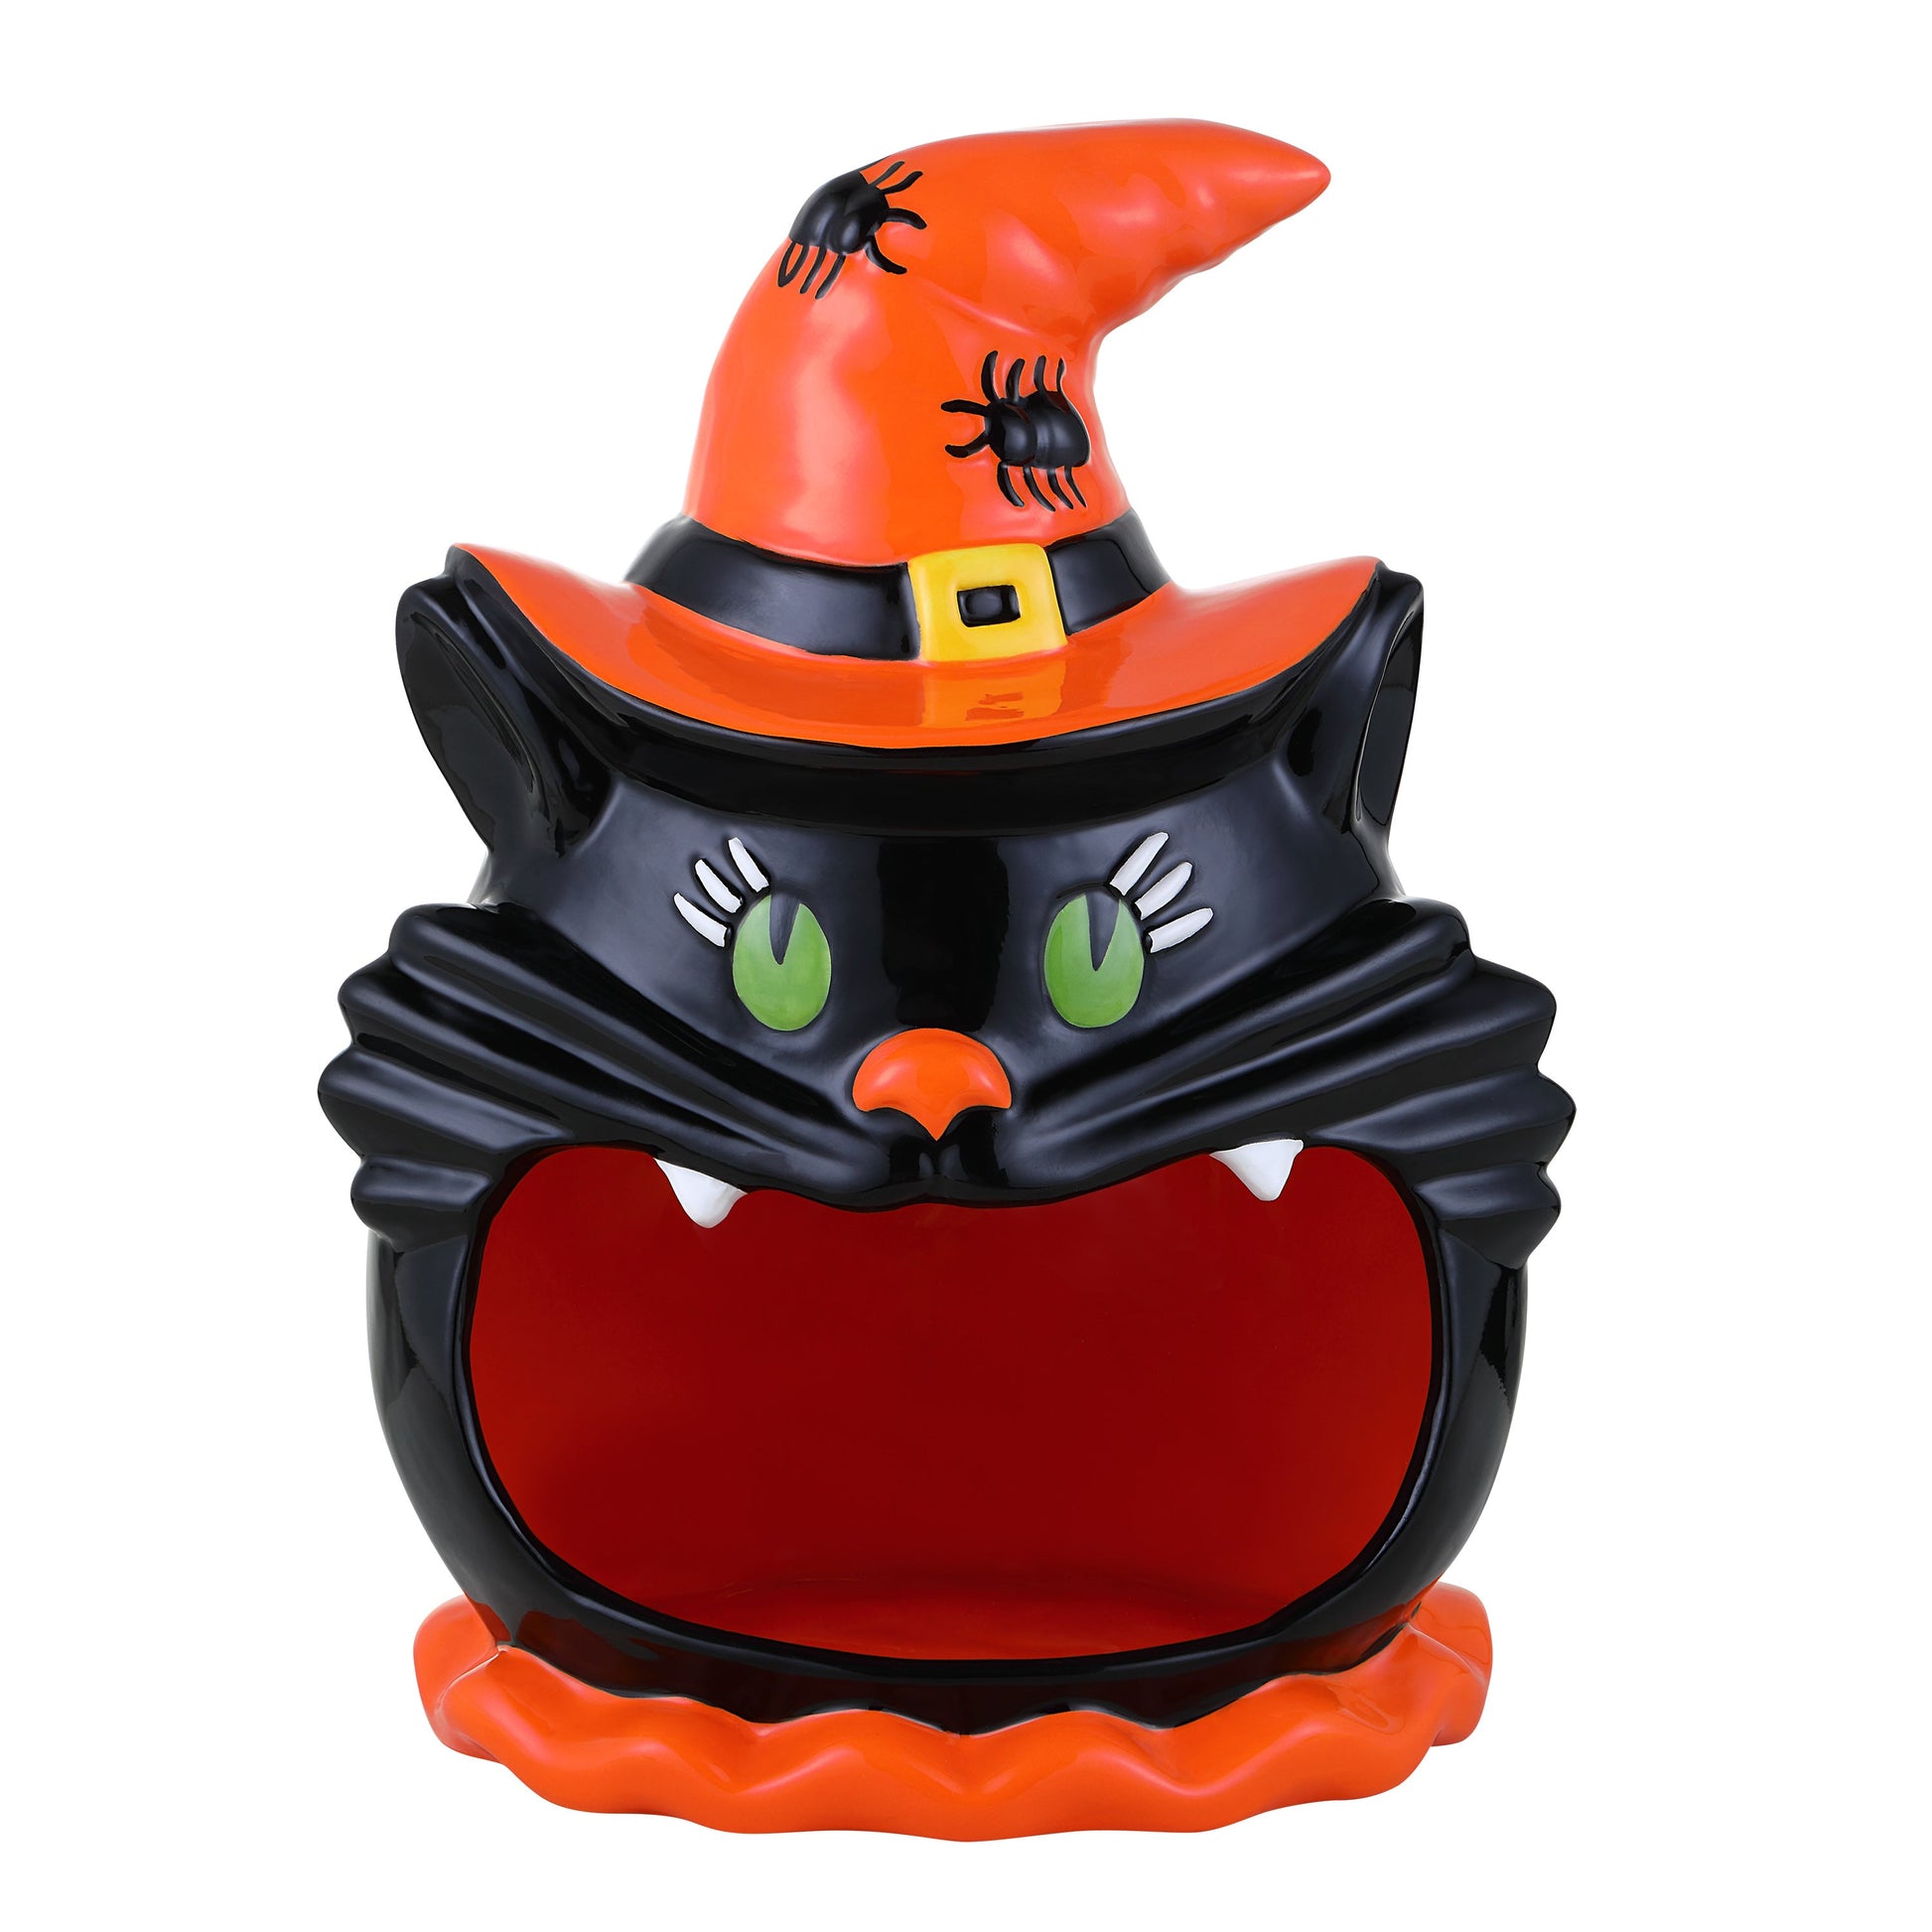 12" Motion Activated Ceramic Black Cat Candy Bowl - Mr. Christmas